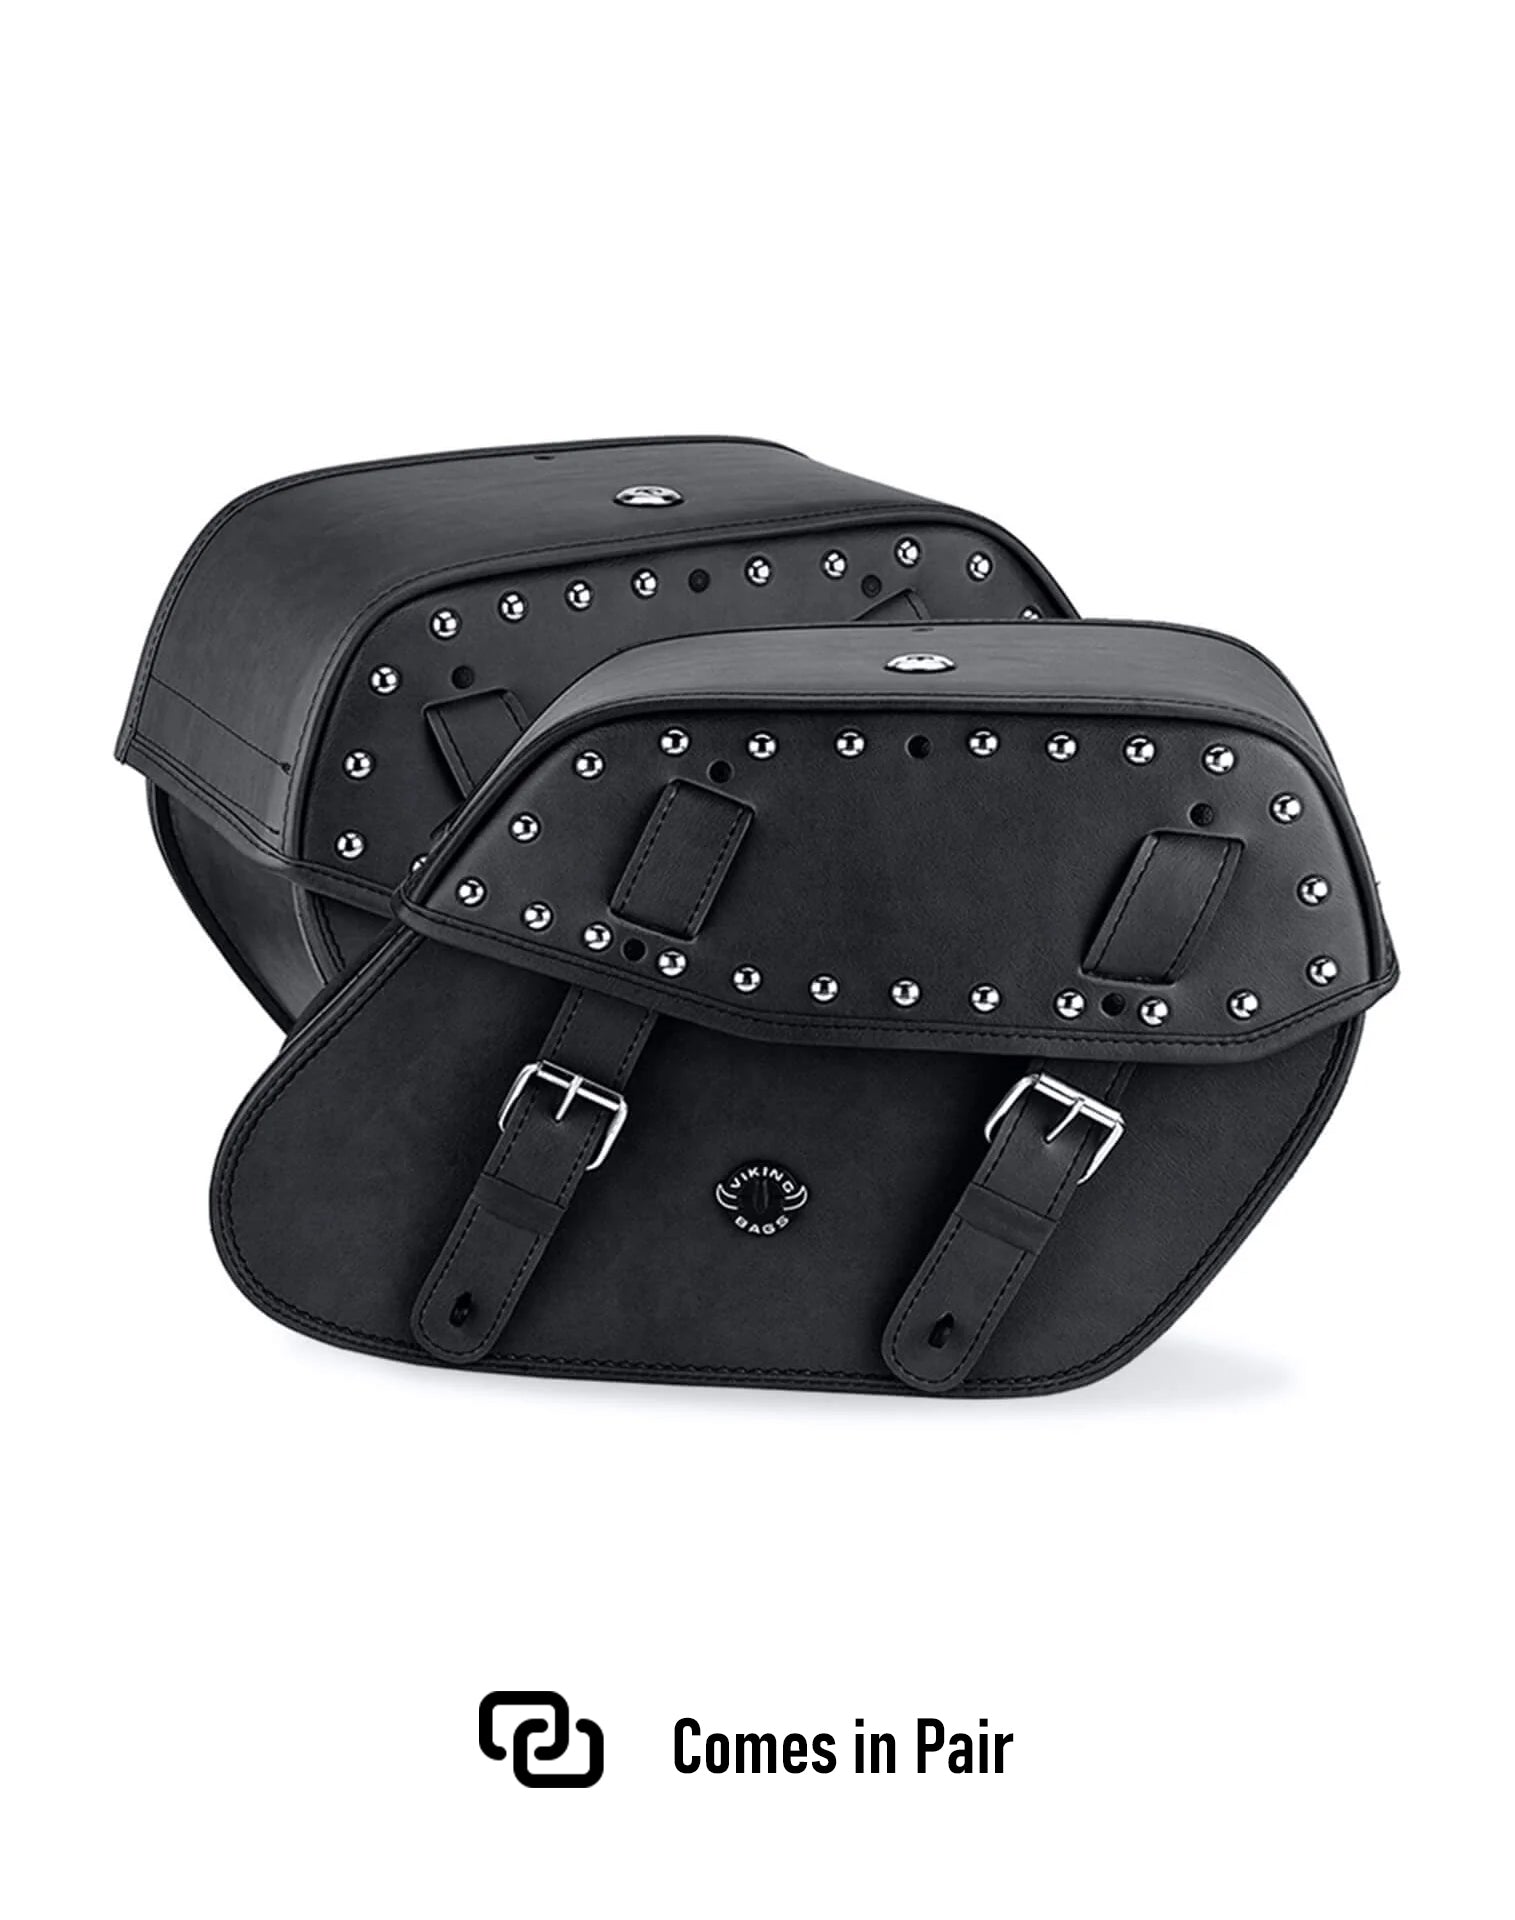 Viking Odin Large Kawasaki Vulcan 1700 Classic Vn1700 Studded Leather Motorcycle Saddlebags Weather Resistant Bags Comes in Pair